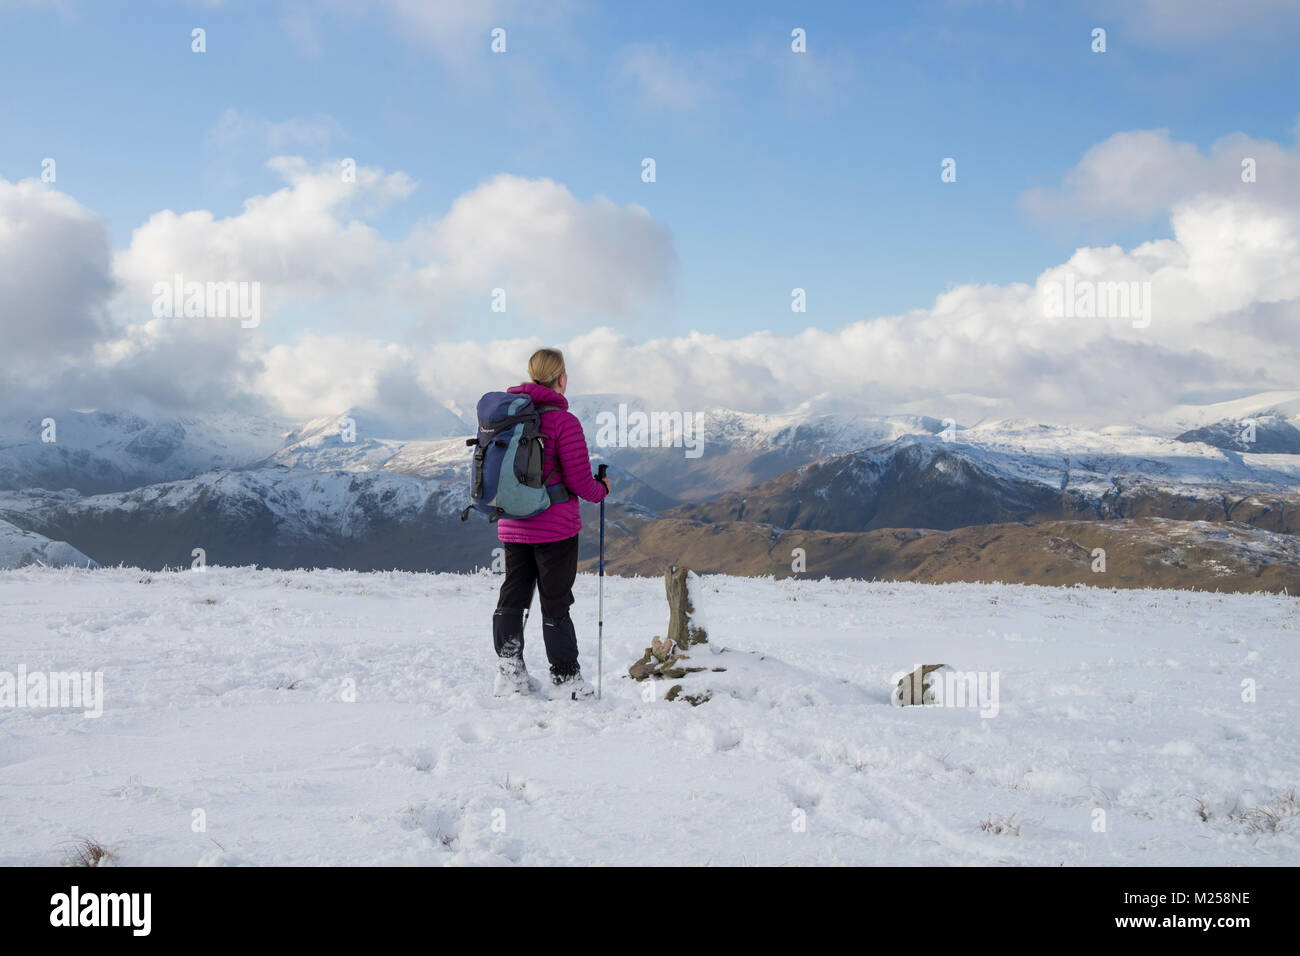 Lake District, Cumbria, UK.  4th February 2018. UK Weather.  Hill walkers enjoyed some wonderful snowy walking conditions and spectacular views over the Ullswater valley in the Lake District today.  The forecast is for continuing cold temperatures and further snow, some of which could affect Southern areas of the UK.  David Forster/Alamy Live News Stock Photo